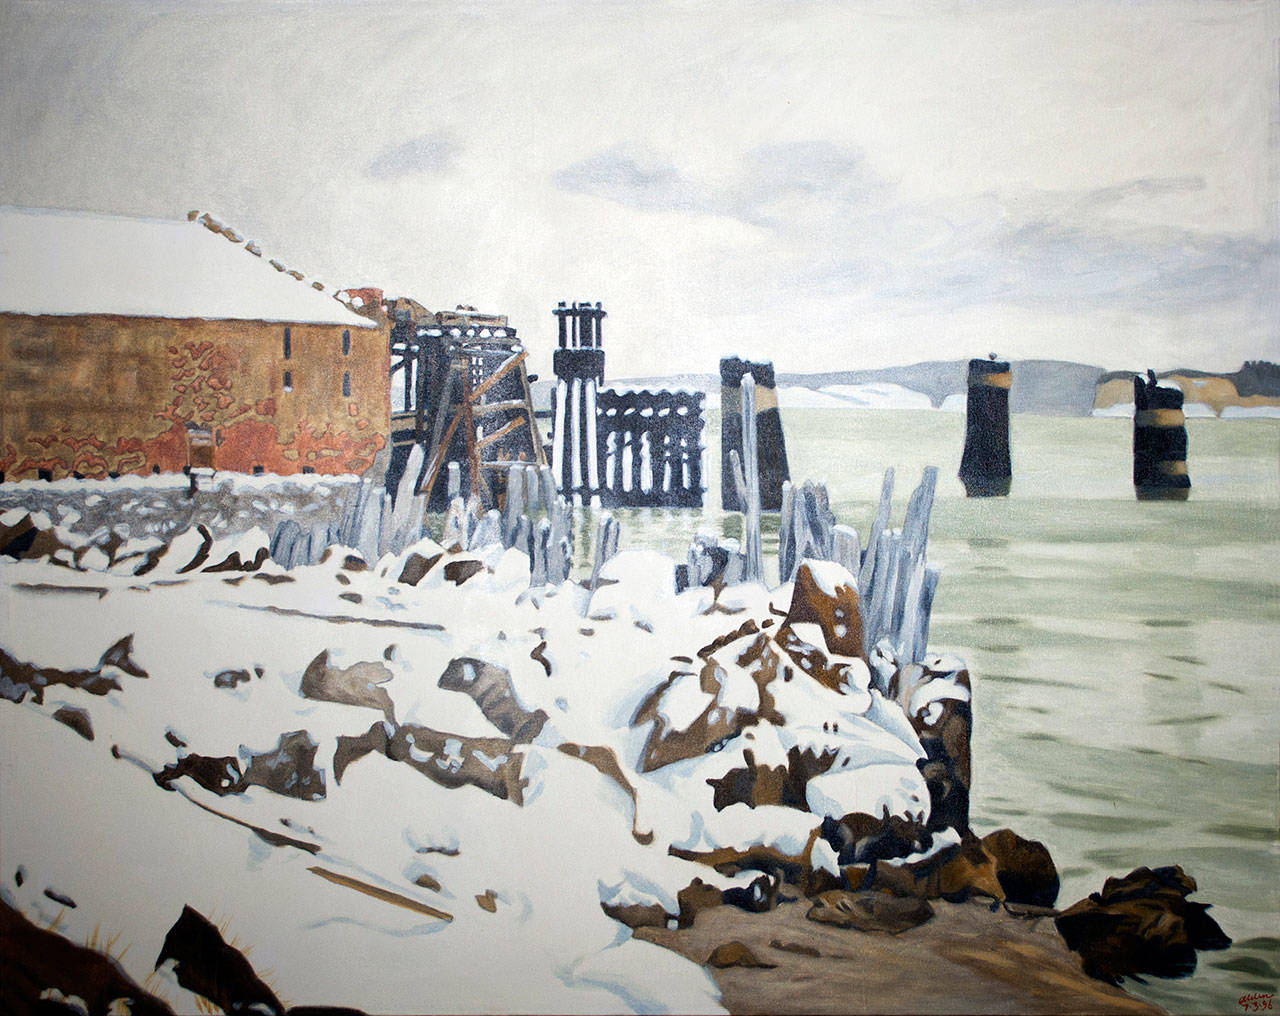 Jim Alden’s paintings, including “Cannery in the Snow,” will be on display at the Port Townsend Library, 1220 Lawrence St., starting today. (Jim Alden)